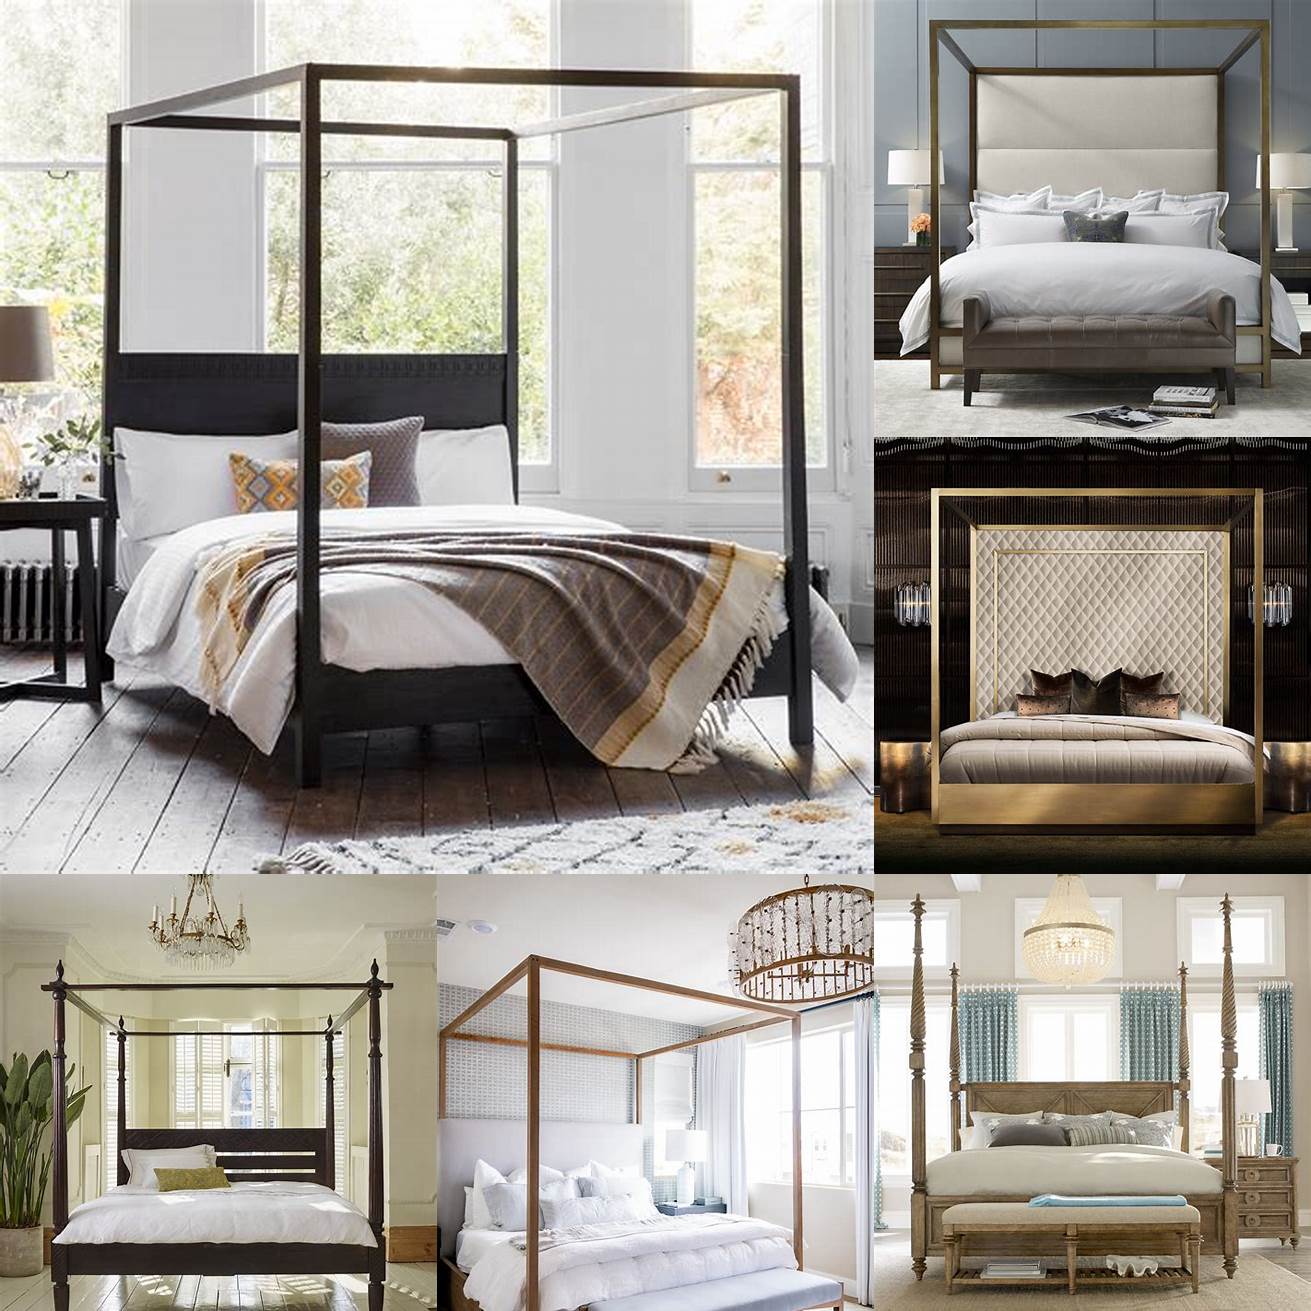 A modern four-poster bed